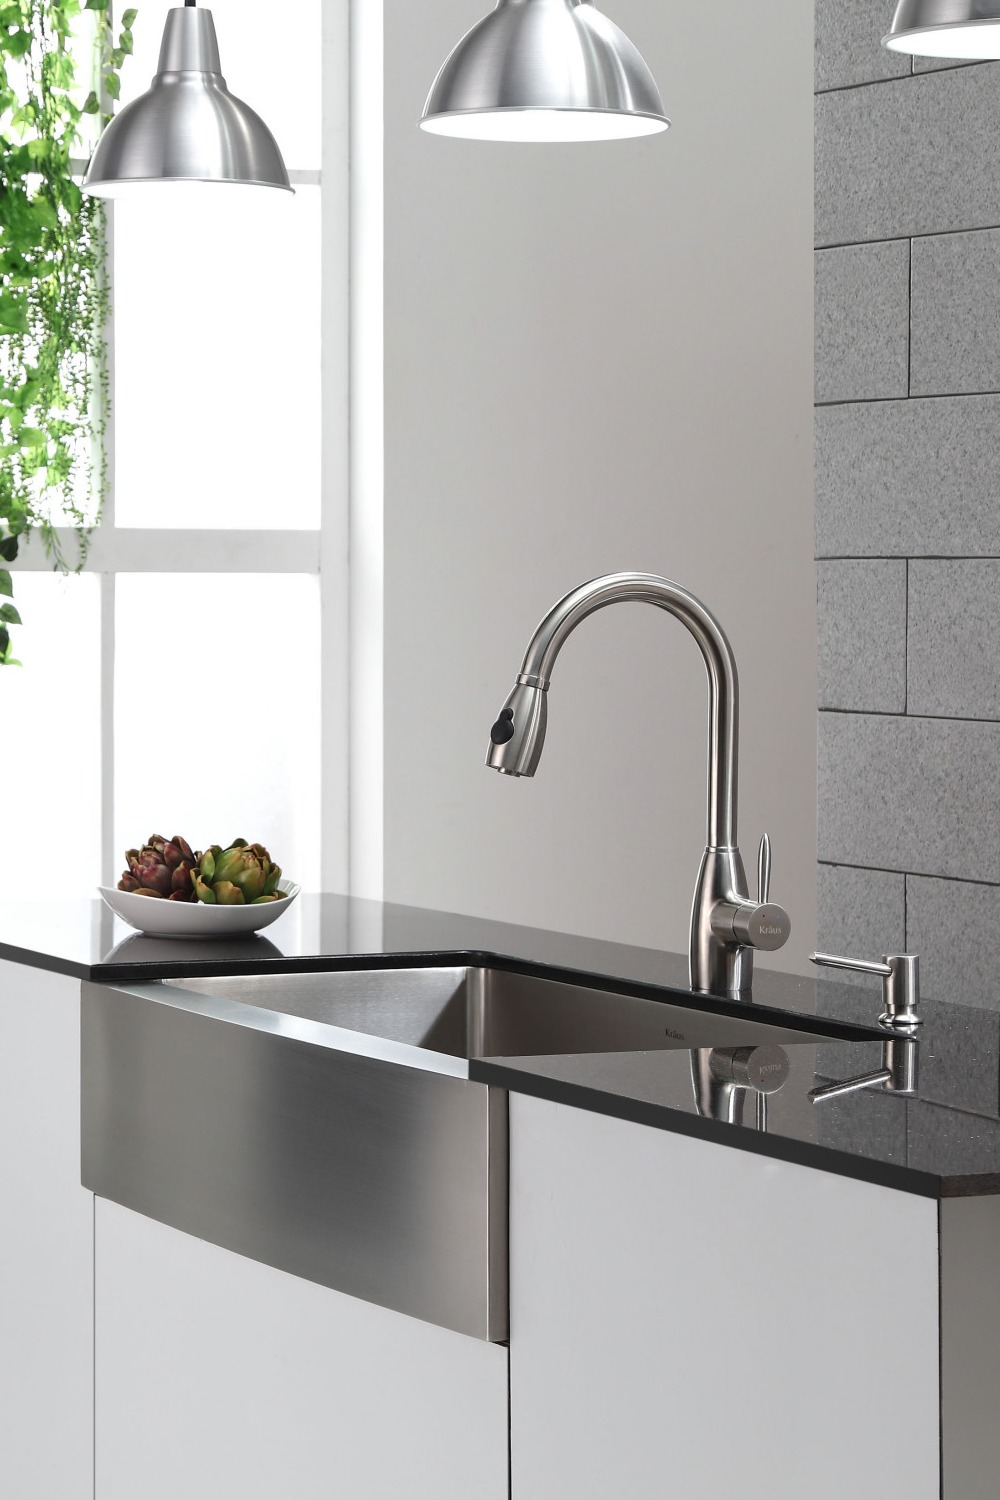 Contemporary Kitchen Sink Faucet Modern Cabinets Gauge Granite Round Material Resistant Space